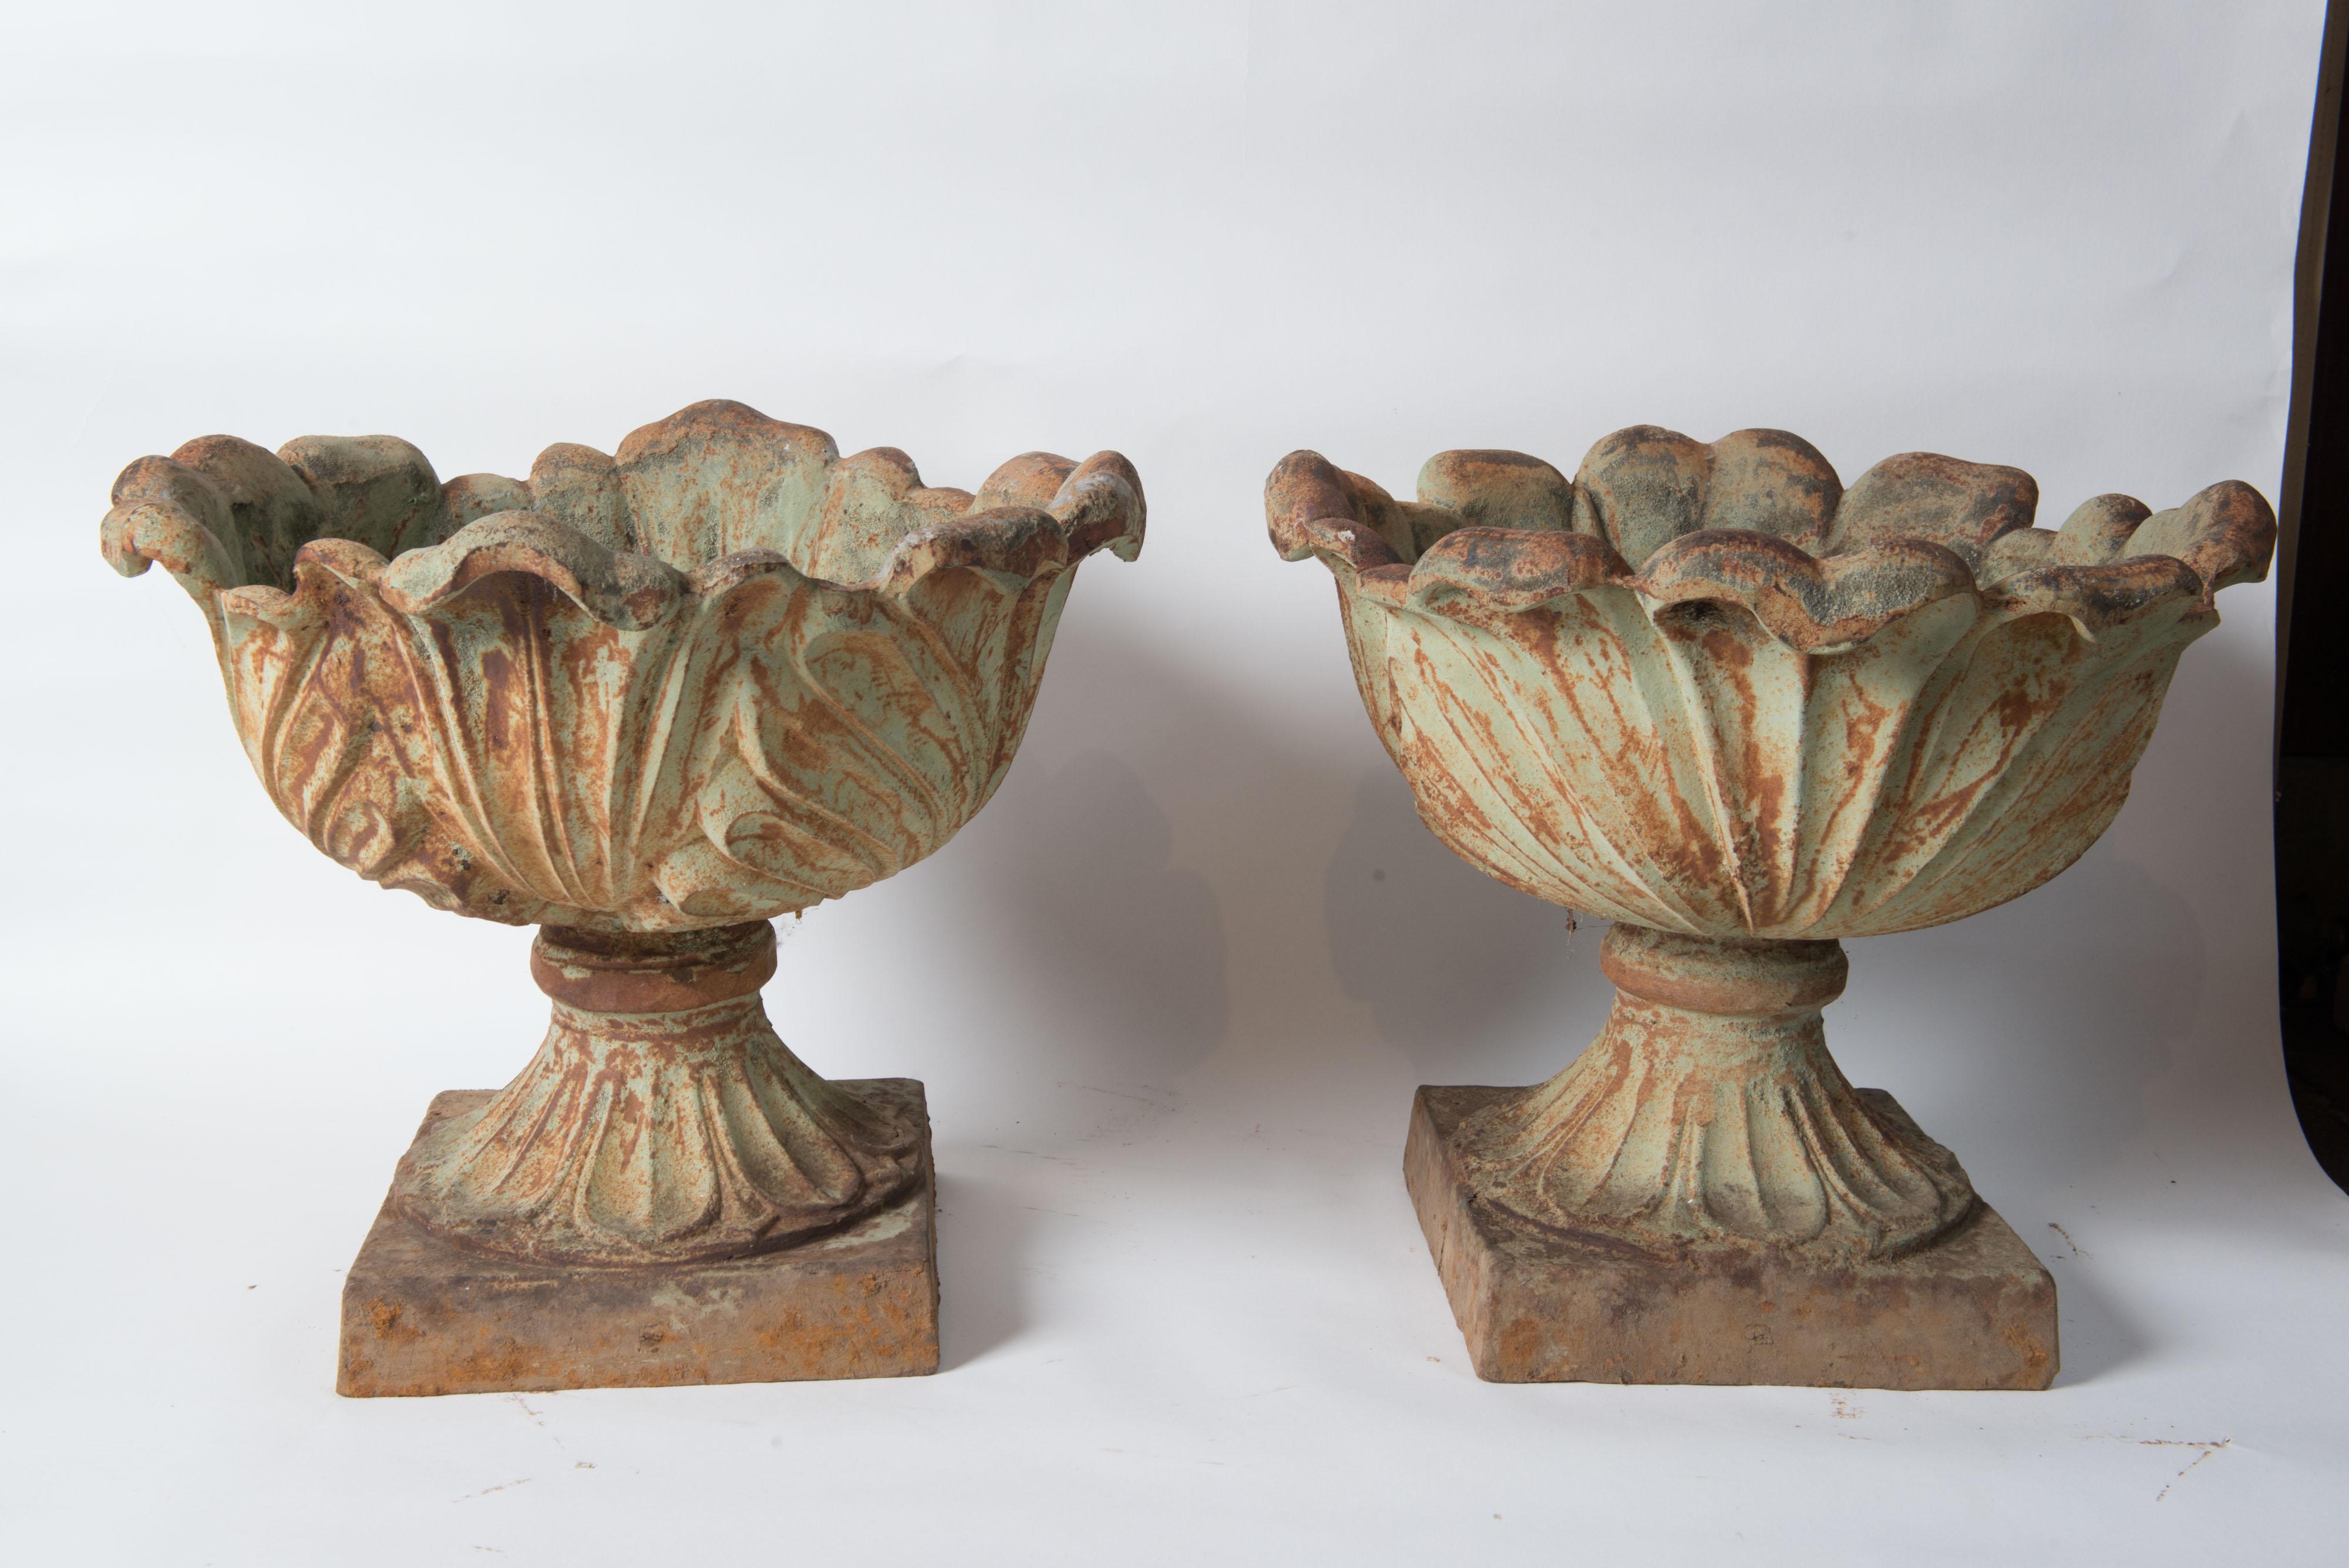 Pair of unusual foliate designed cast iron American urns or planters. A large detailed leaf pattern decorates these urns creating an organic scalloped floral like edge. Small area of base detail is worn on one urn. See photos. 0.5